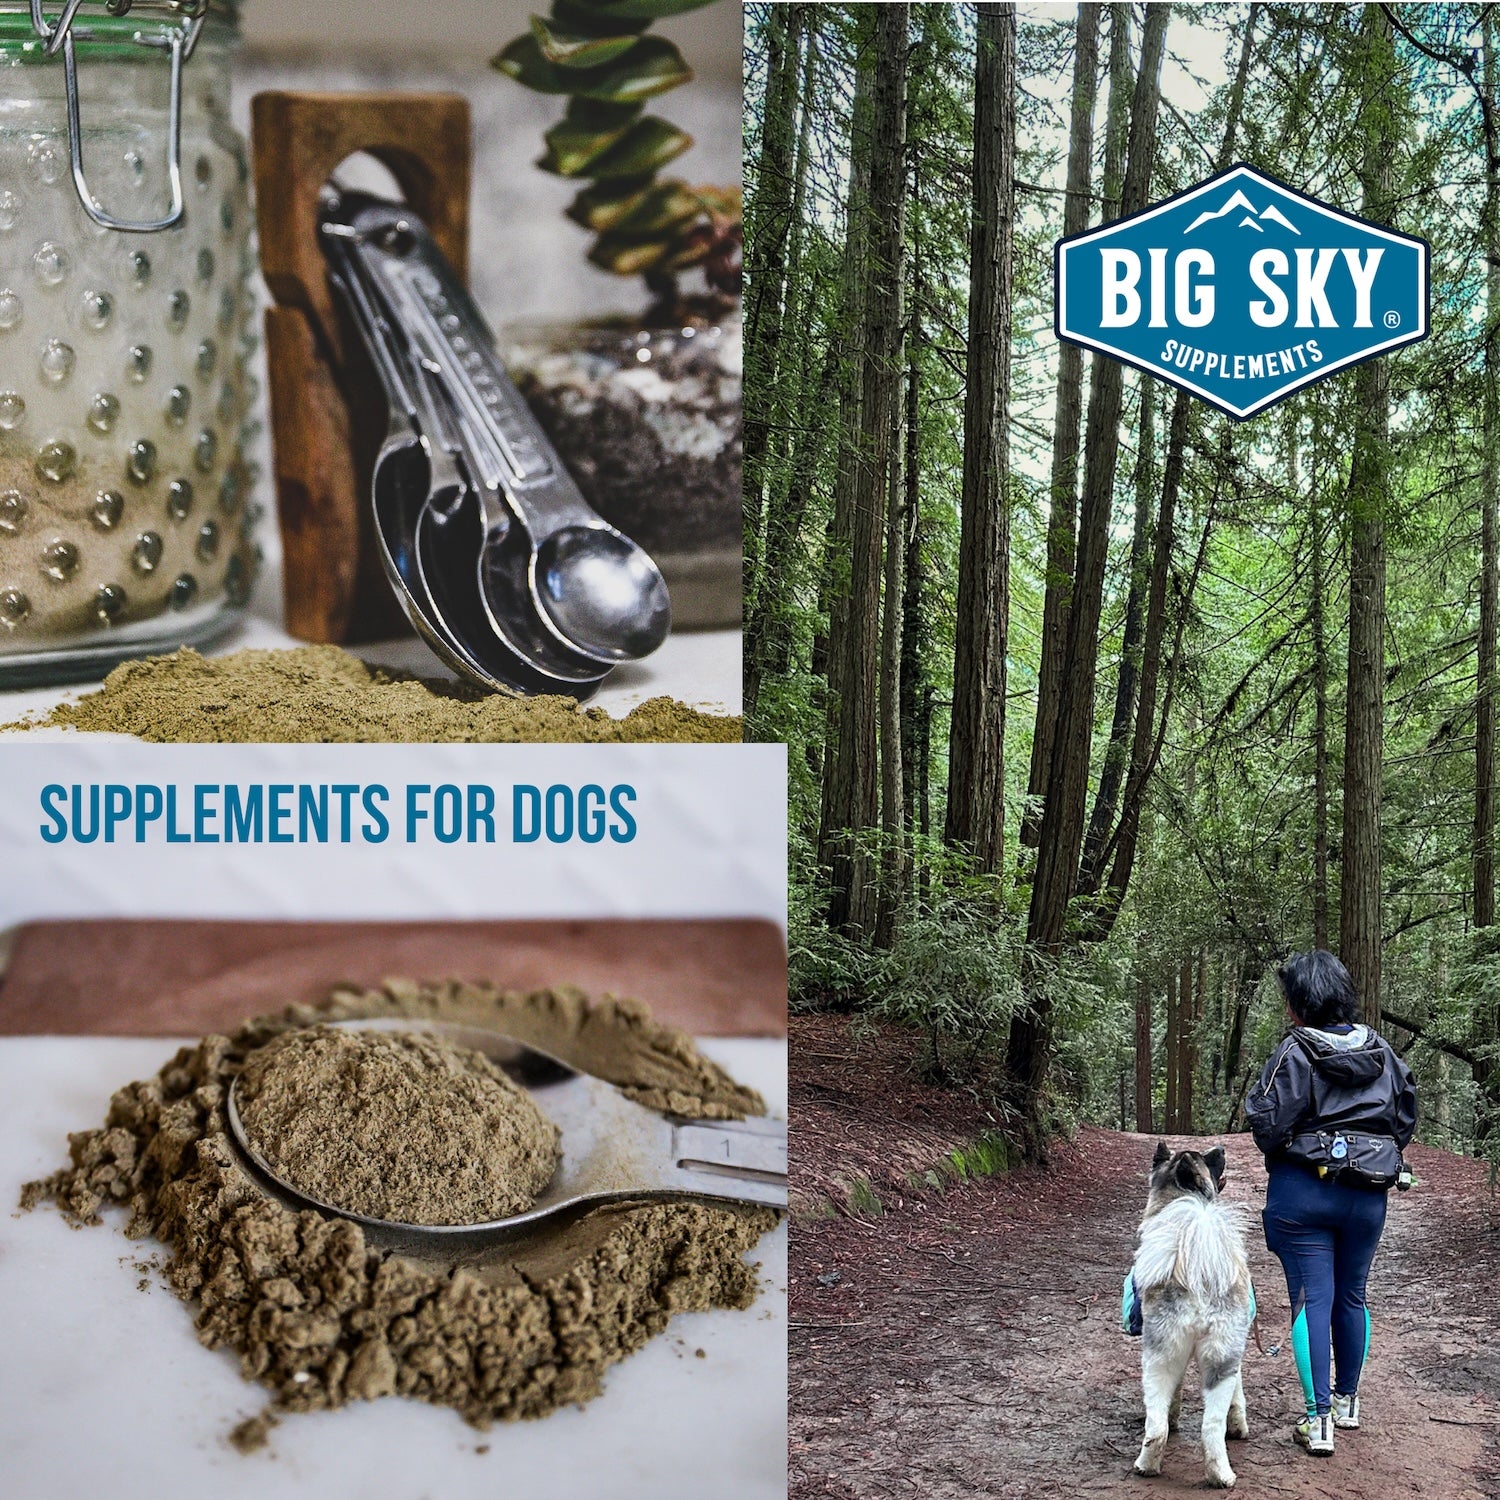 All Natural Herb supplements for healthy dog holistic health